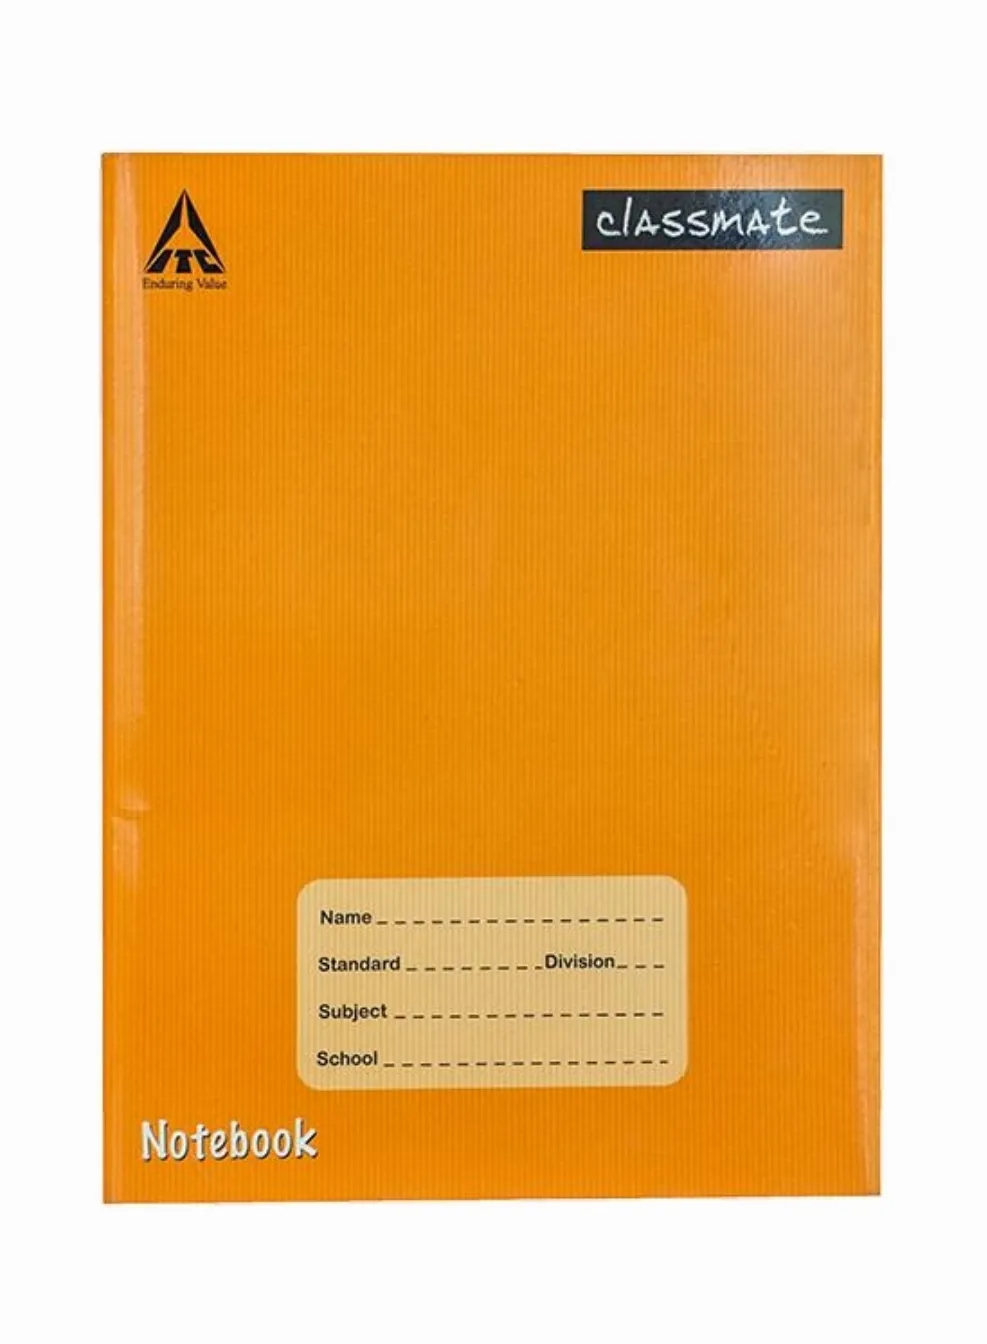 Classmate English Practical Notebook Soft Cover Four Line With Gap Inter Leaf 172 Pages 24X18 Cm Pack of 1